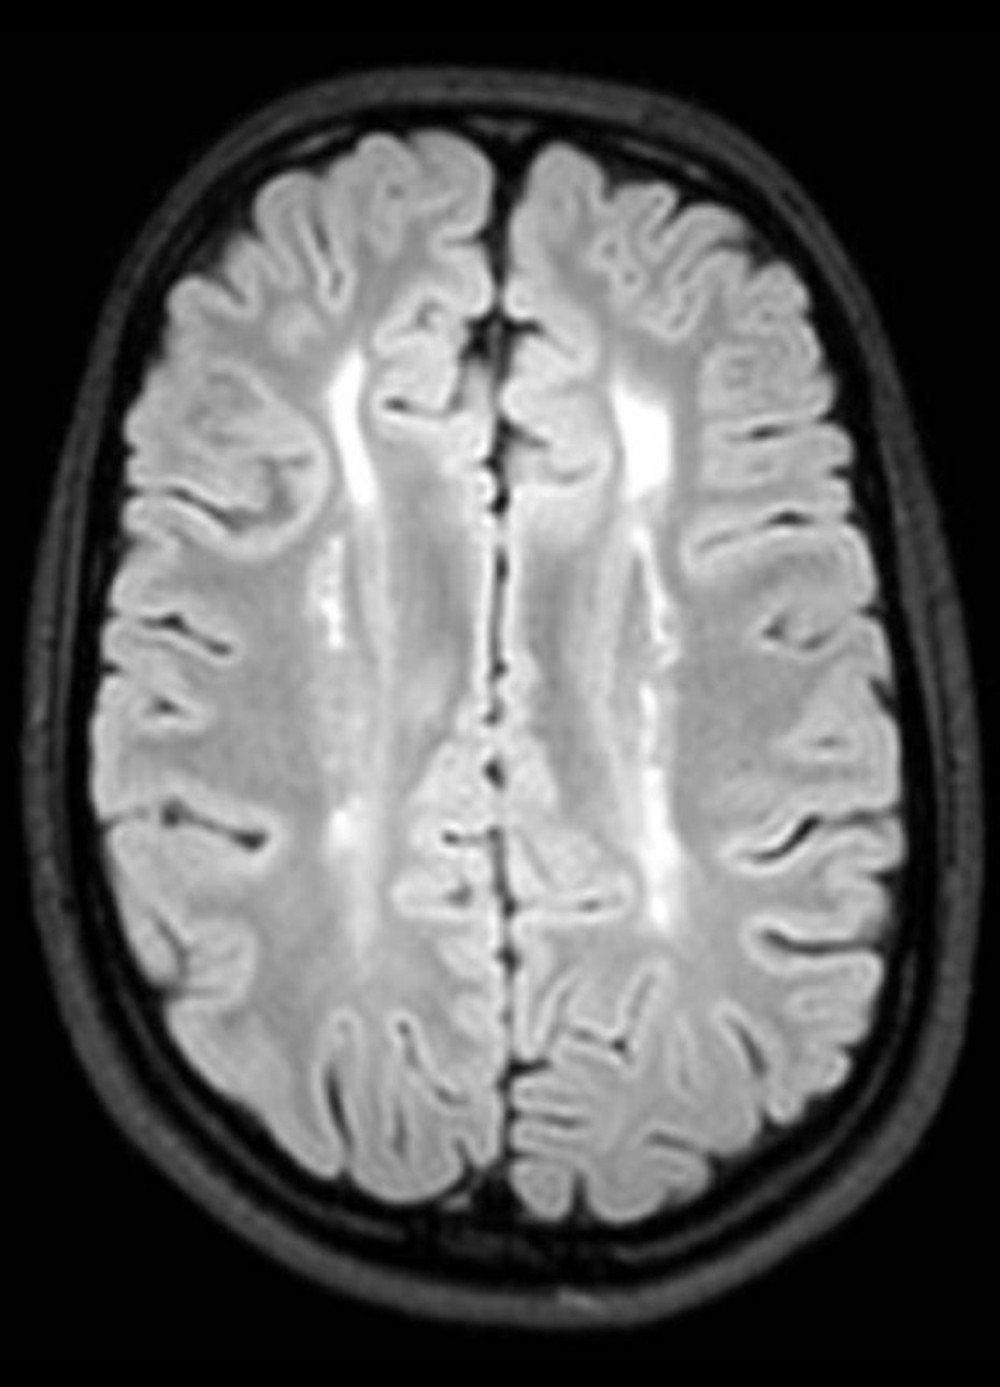 The proband’s magnetic resonance imaging showing periventricular symmetric transverse relaxation time (T2) and fluid-attenuated inversion recovery (FLAIR) hyperintense white matter lesions in both hemispheres.